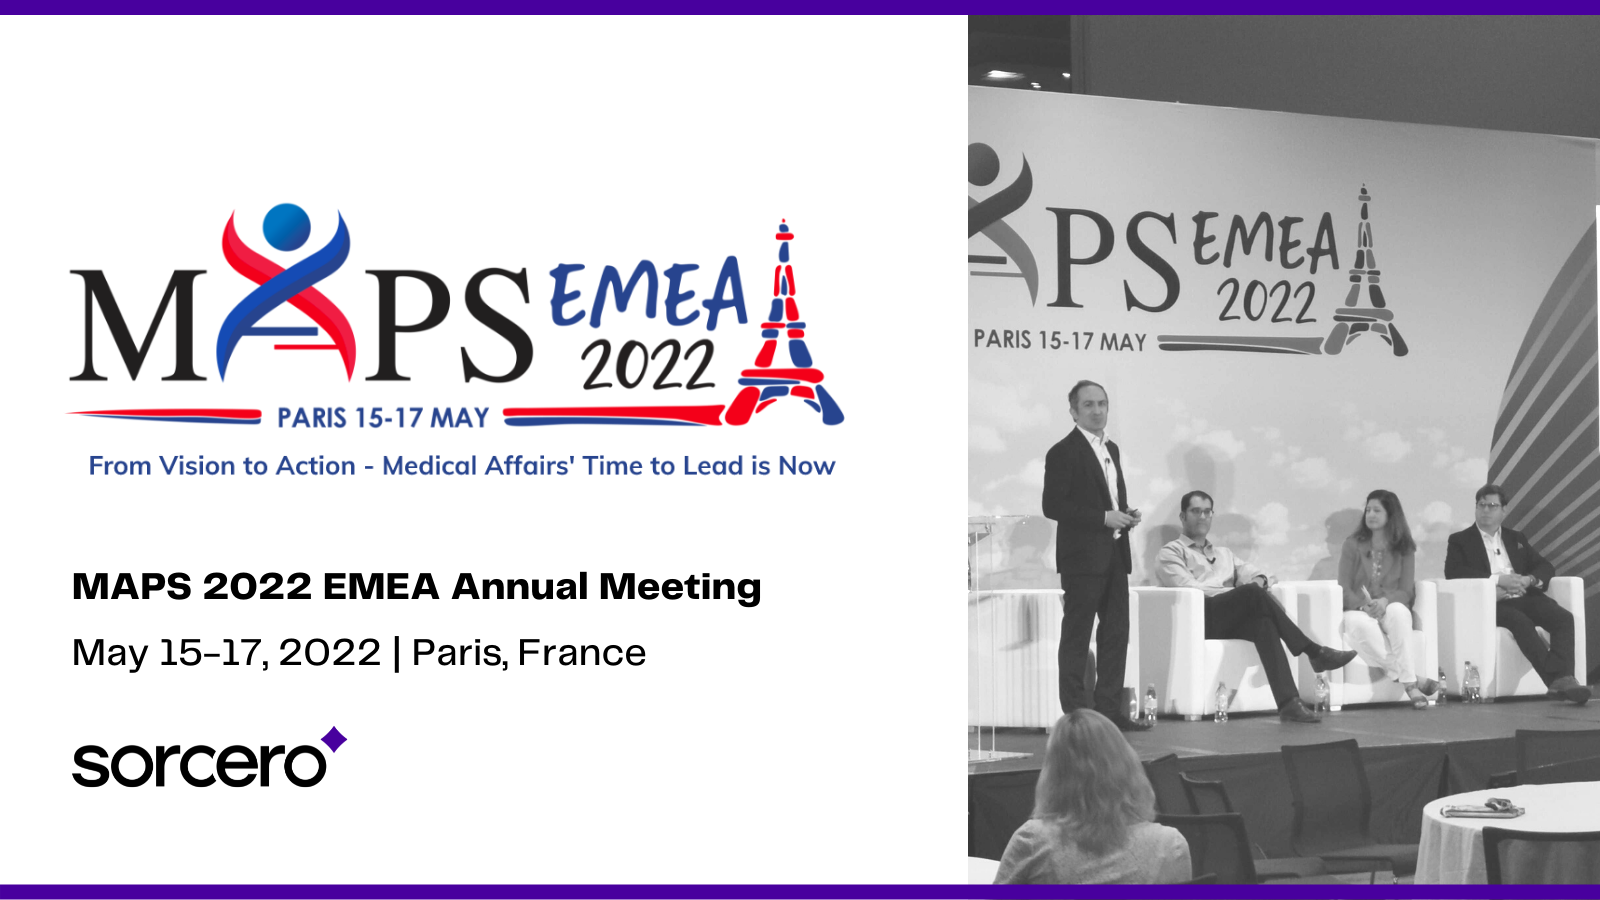 3 Key Takeaways from the MAPS 2022 EMEA Annual Meeting